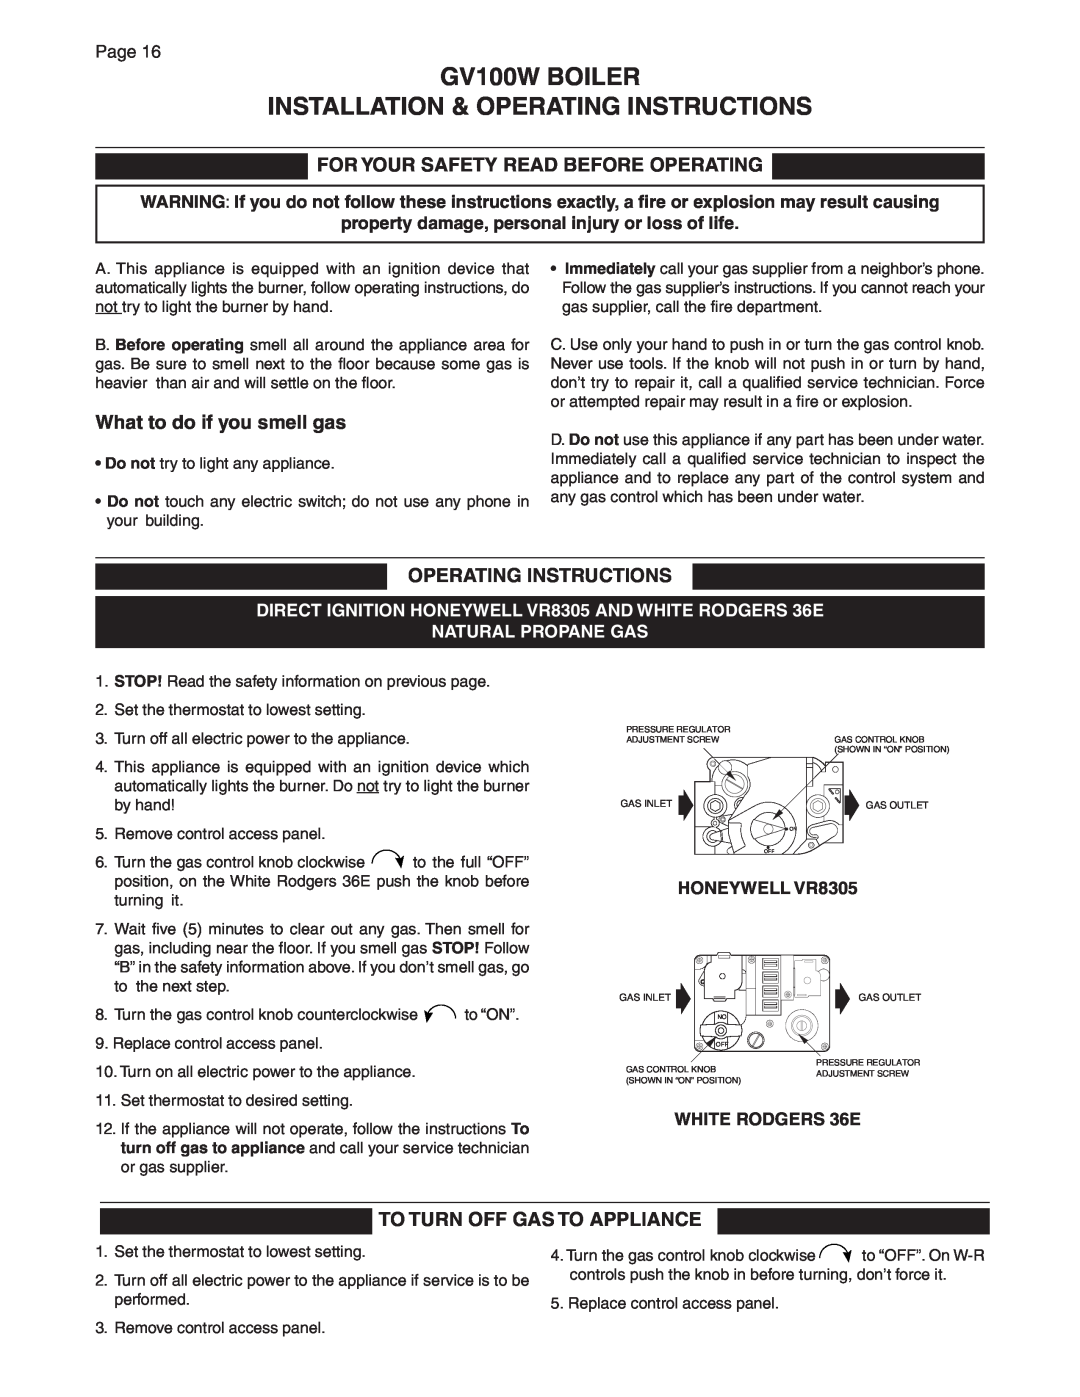 Smith Cast Iron Boilers GVIOM-5R manual GV100W BOILER, Installation & Operating Instructions, What to do if you smell gas 